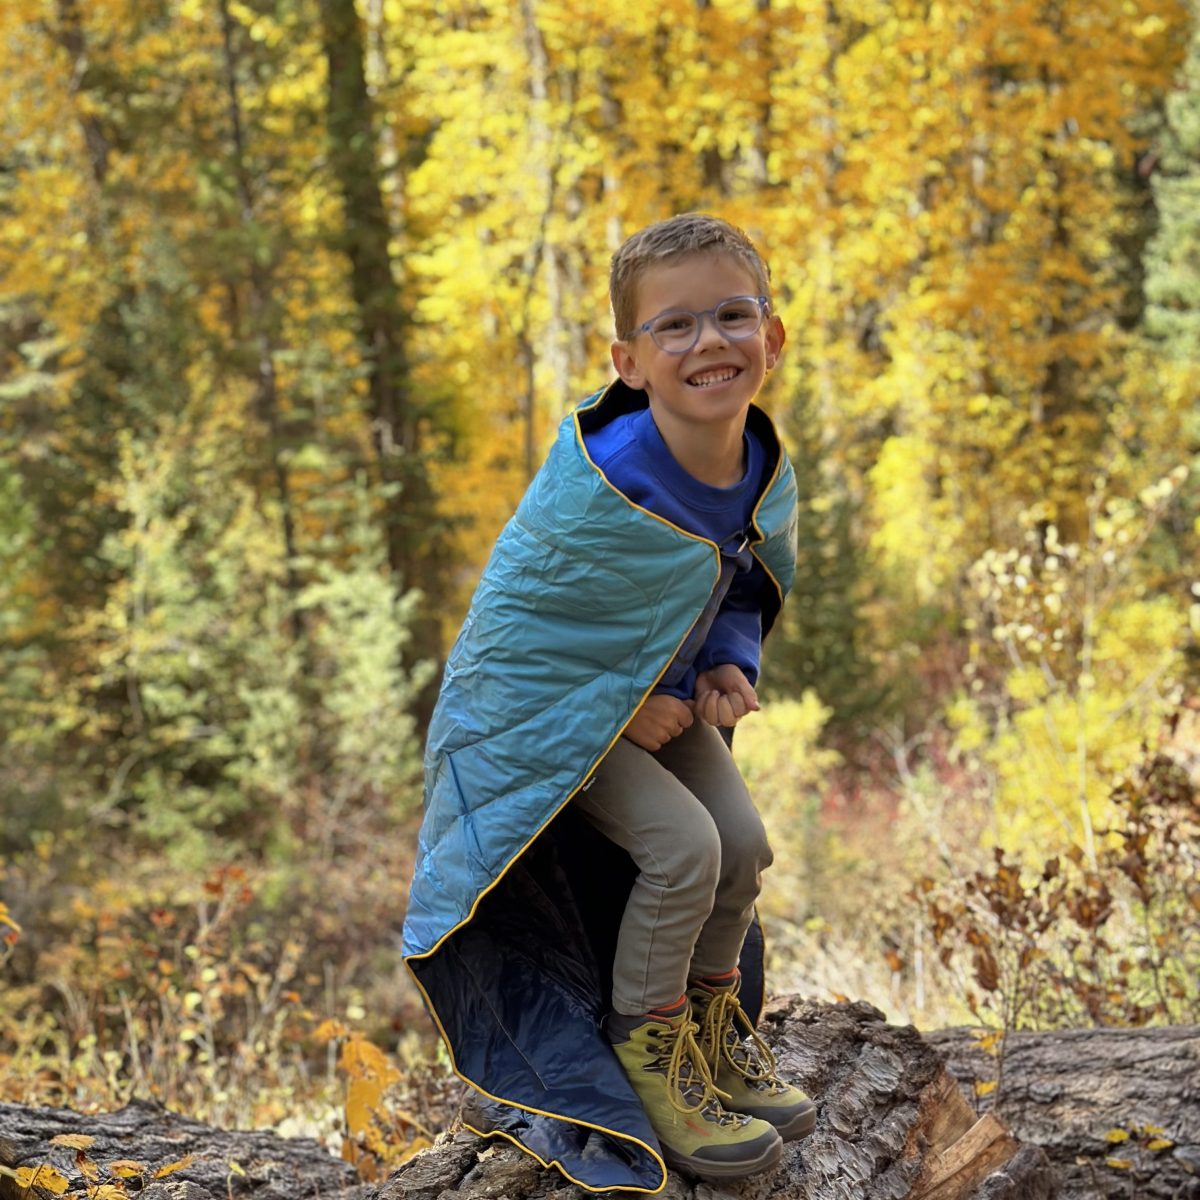 Young boy wrapped in a blanket poses on a log.